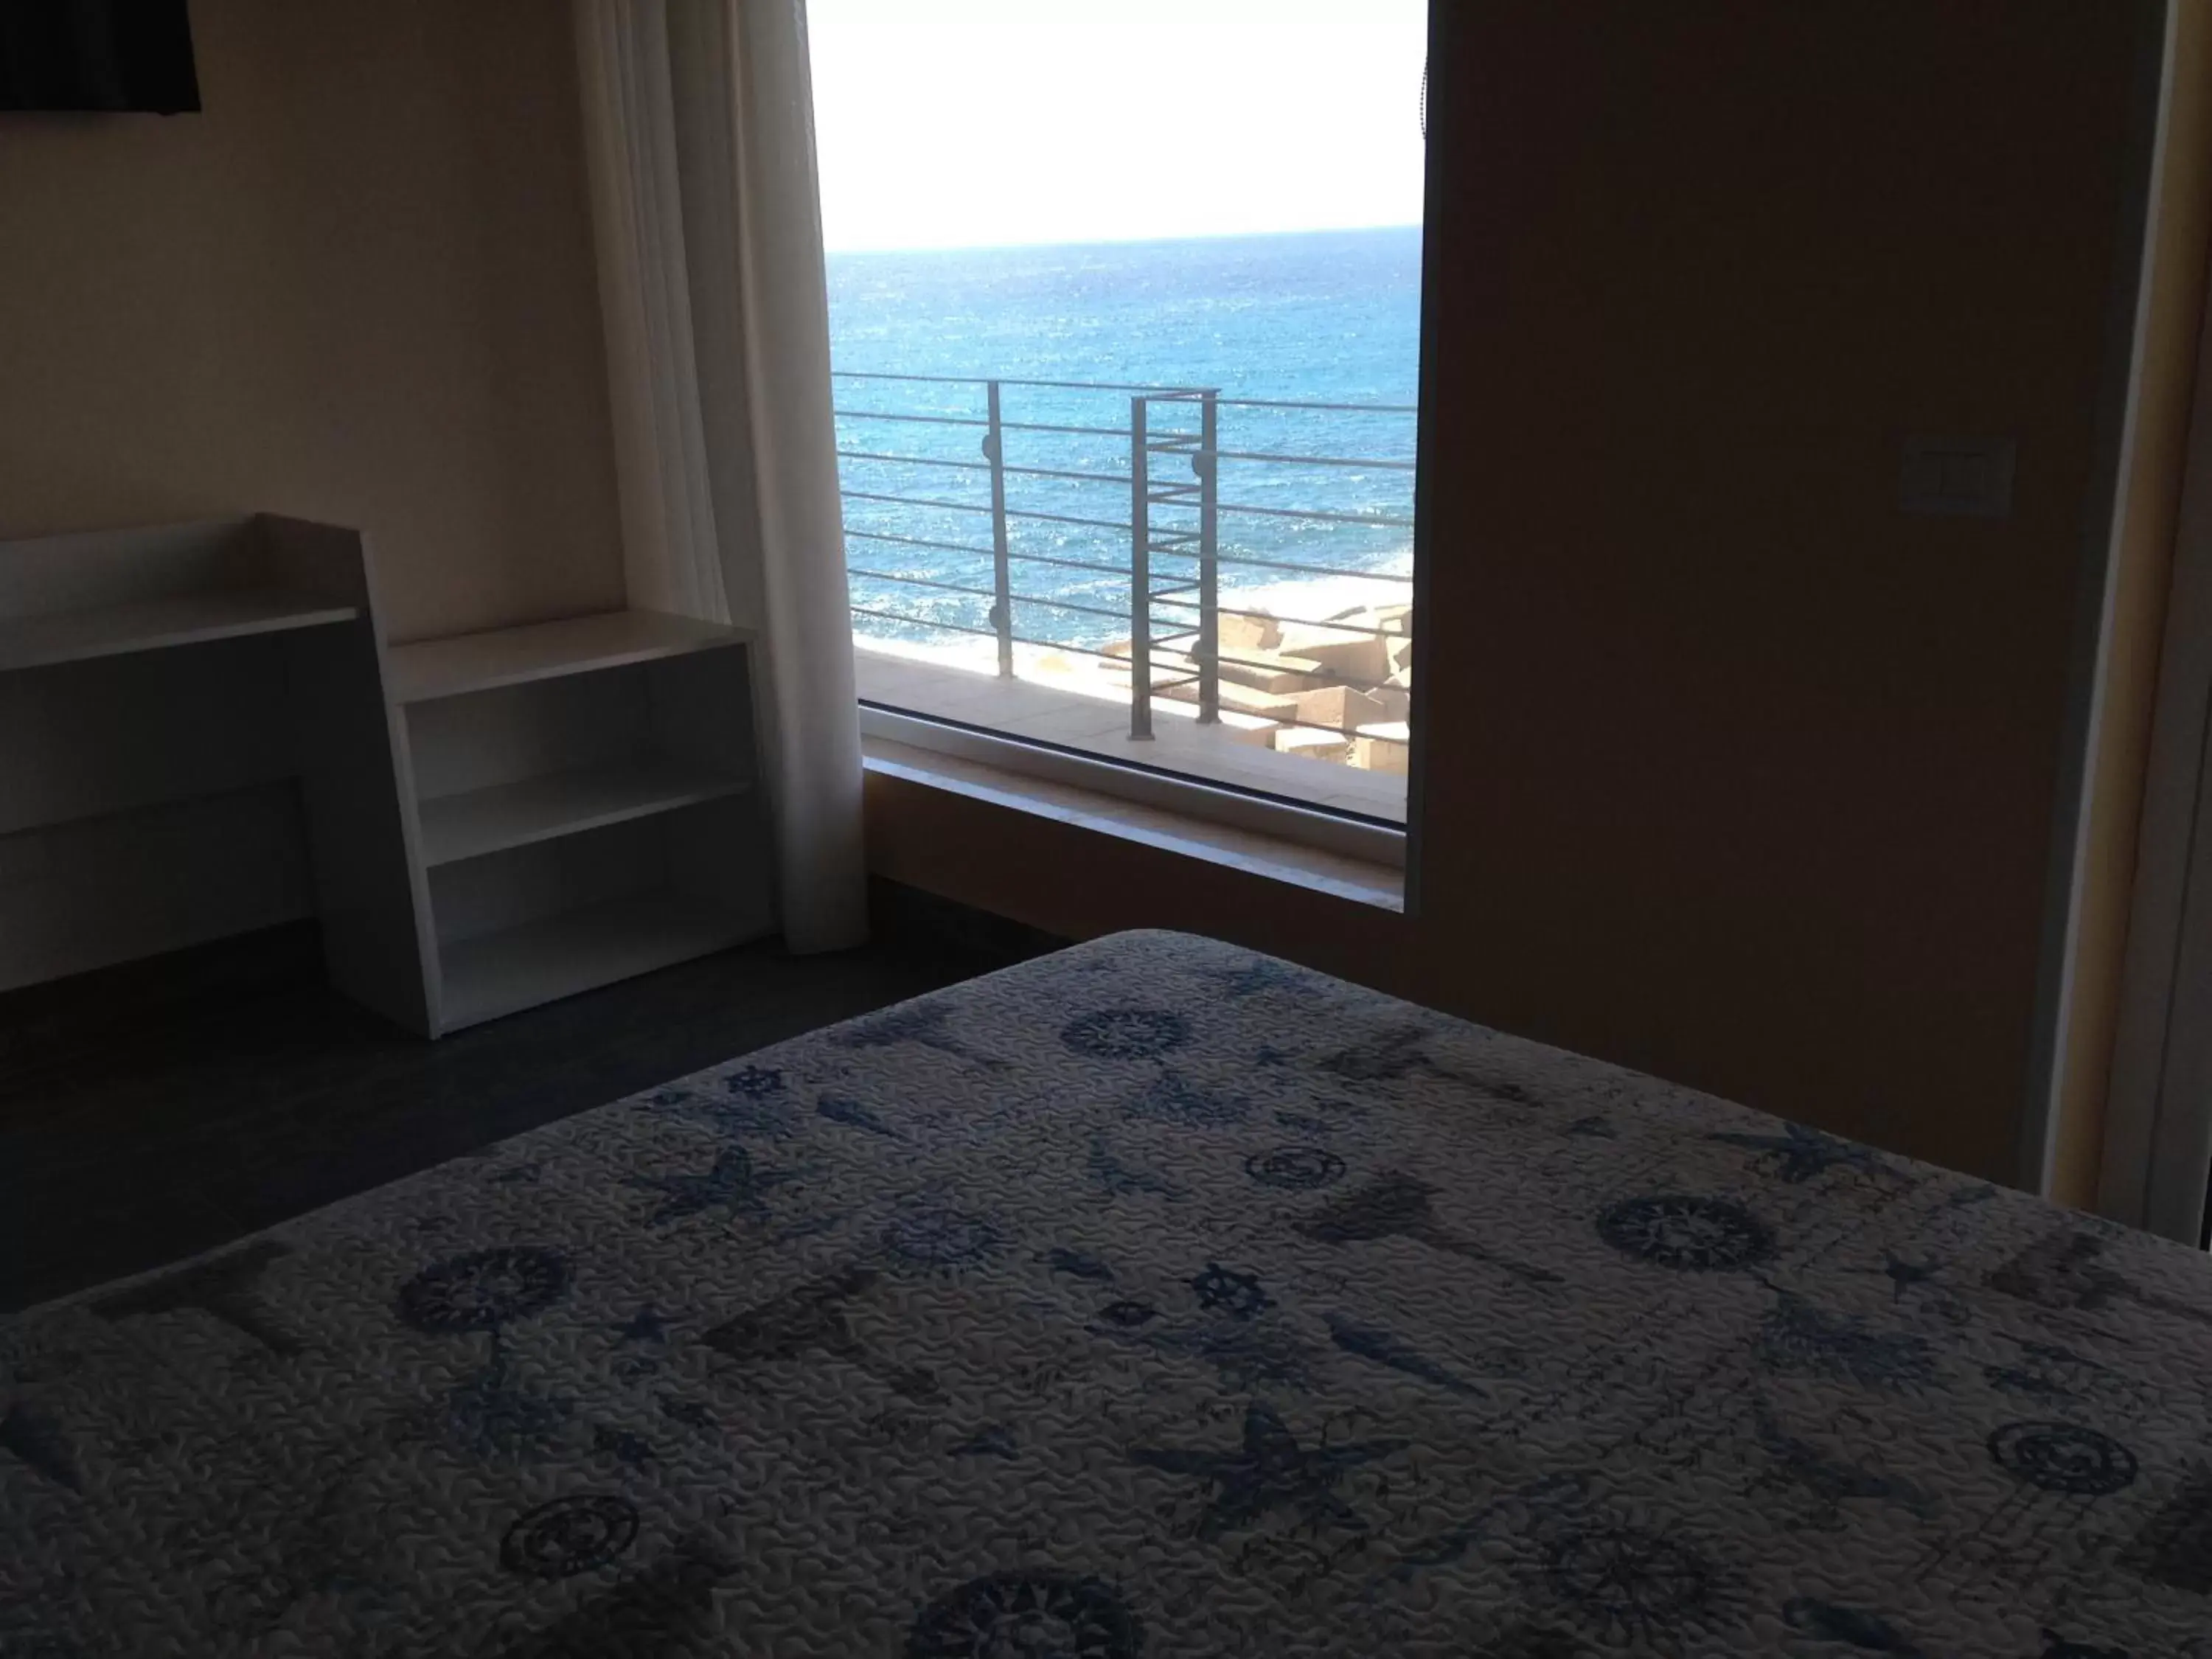 Sea View in Salento Palace Bed & Breakfast